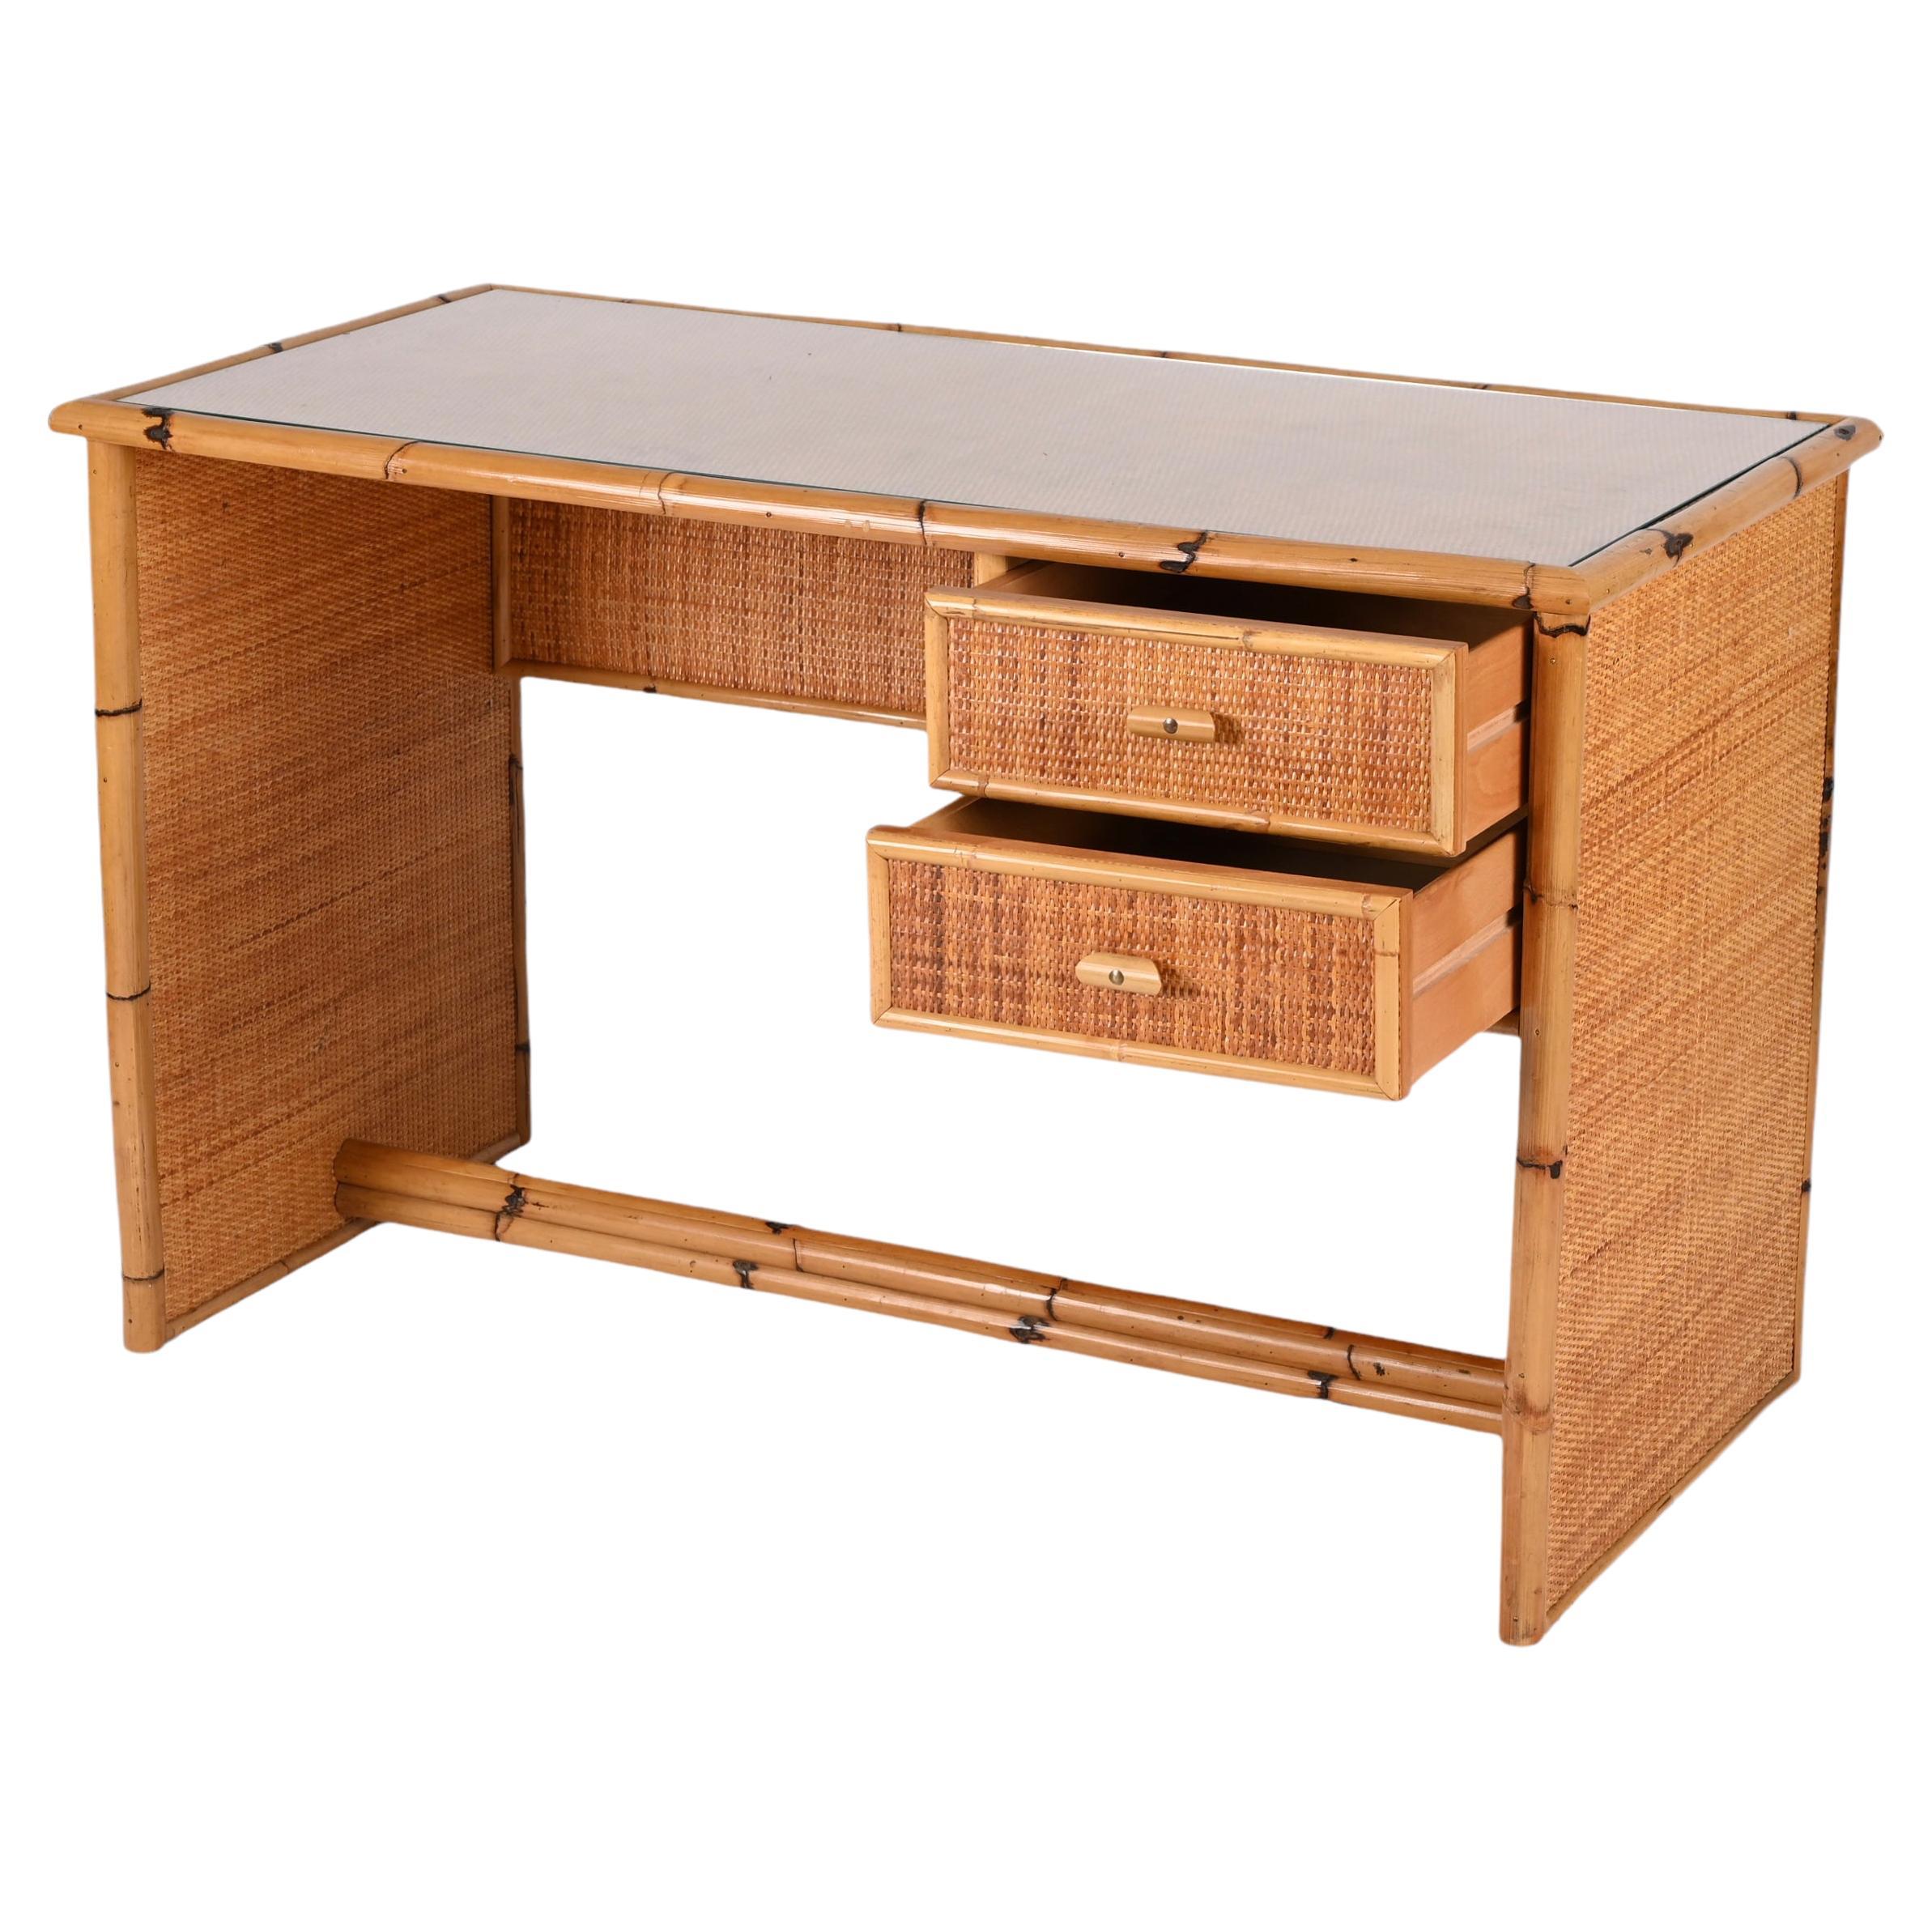 Midcentury glass top, bamboo and wicker desk with drawers. This excellent piece was designed in Italy in the 1980s.

This desk is unique for the materials used, bamboo and rattan, and has two drawers. The top is made of crystal glass and the